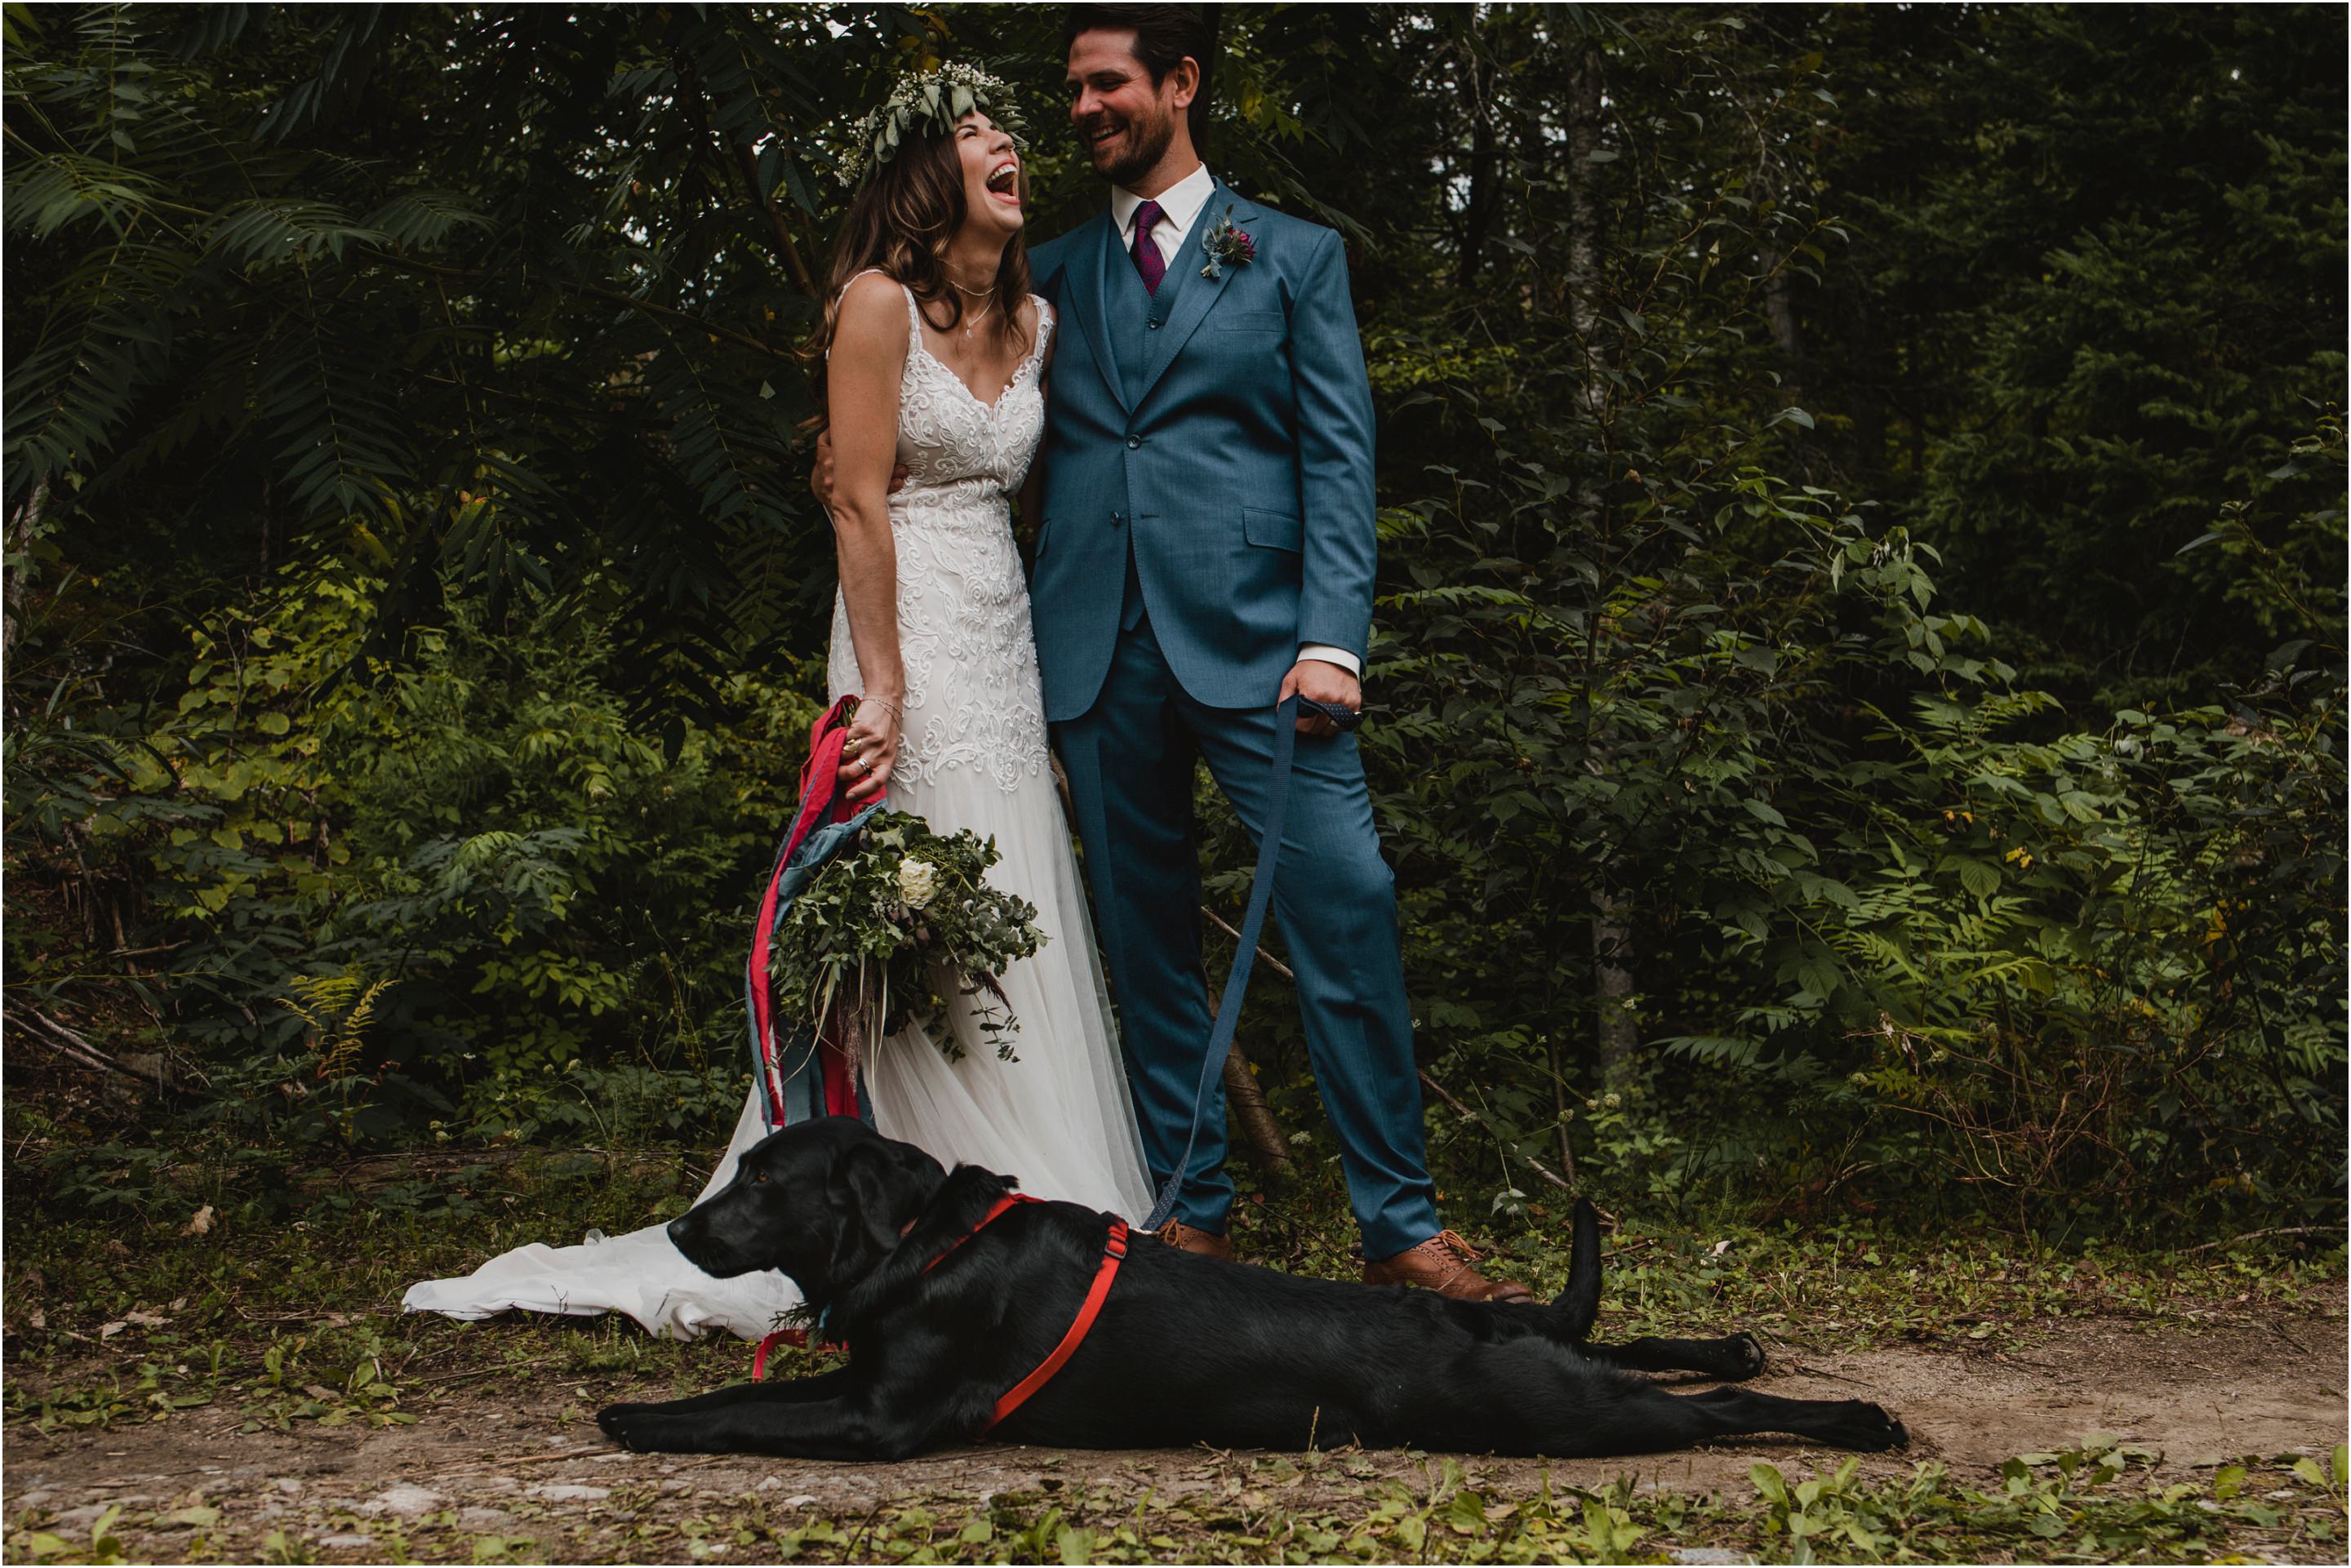 Bride & Groom and their dog at Wilderness Tours Wedding - Cindy Lottes Photography